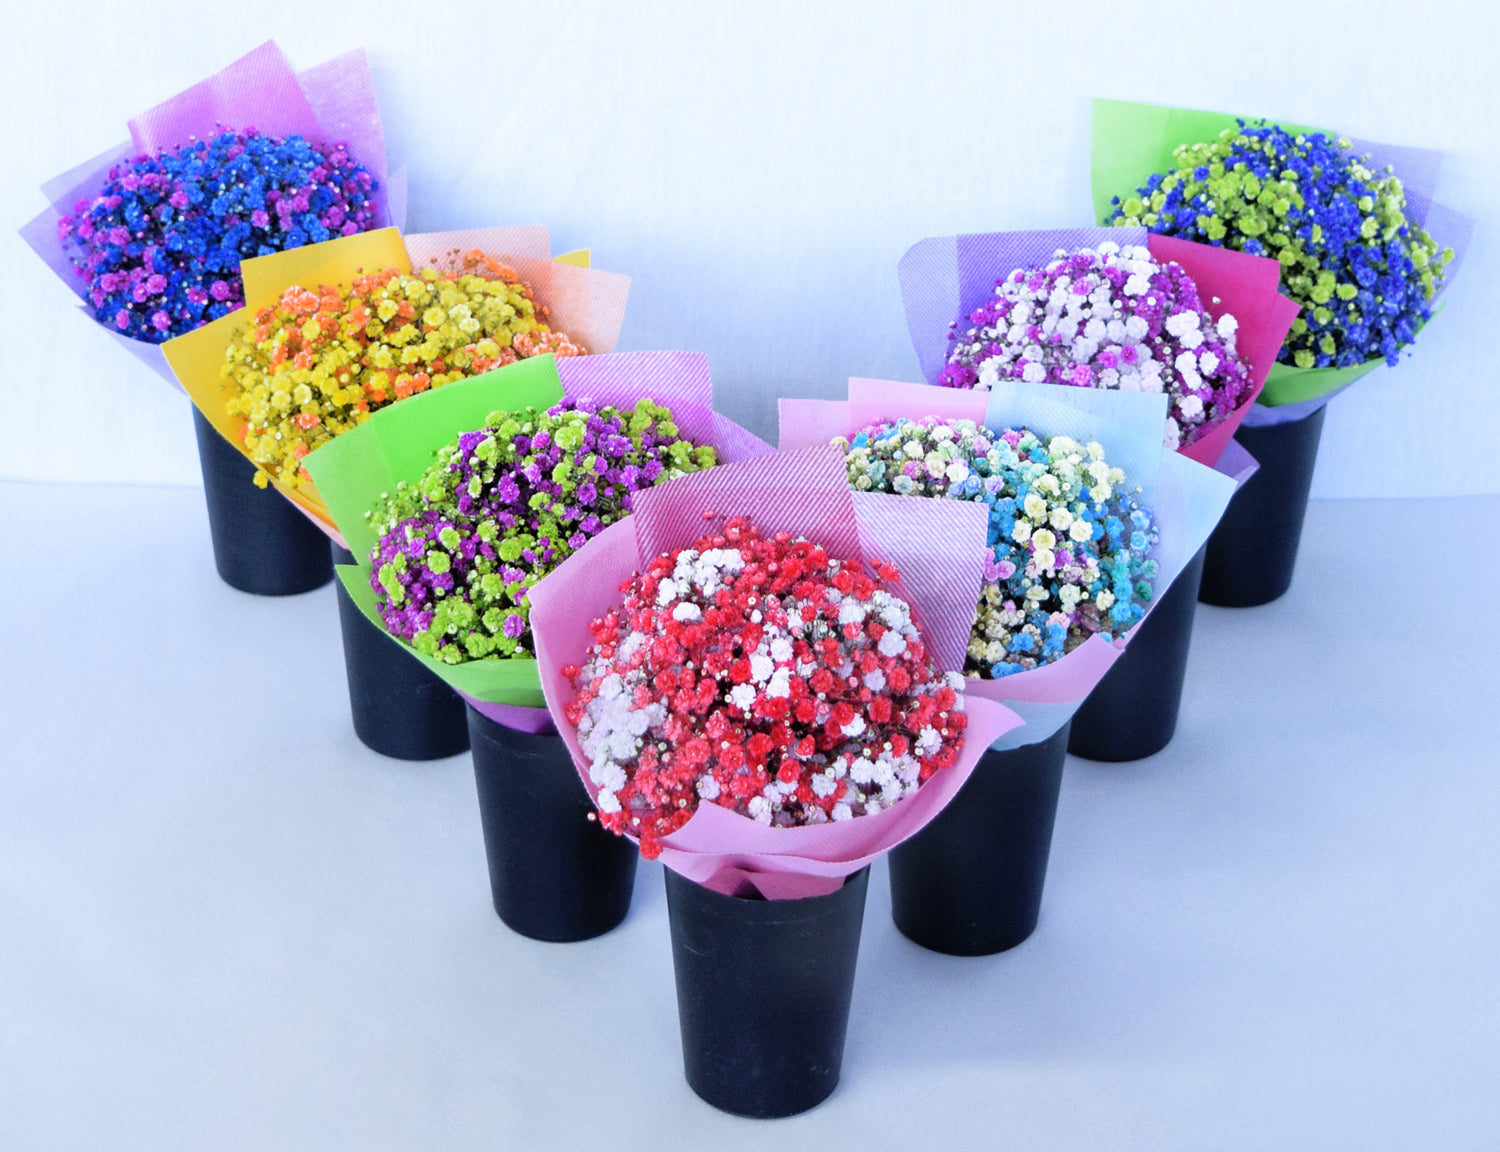 Dyed Baby's Breath Bouquets